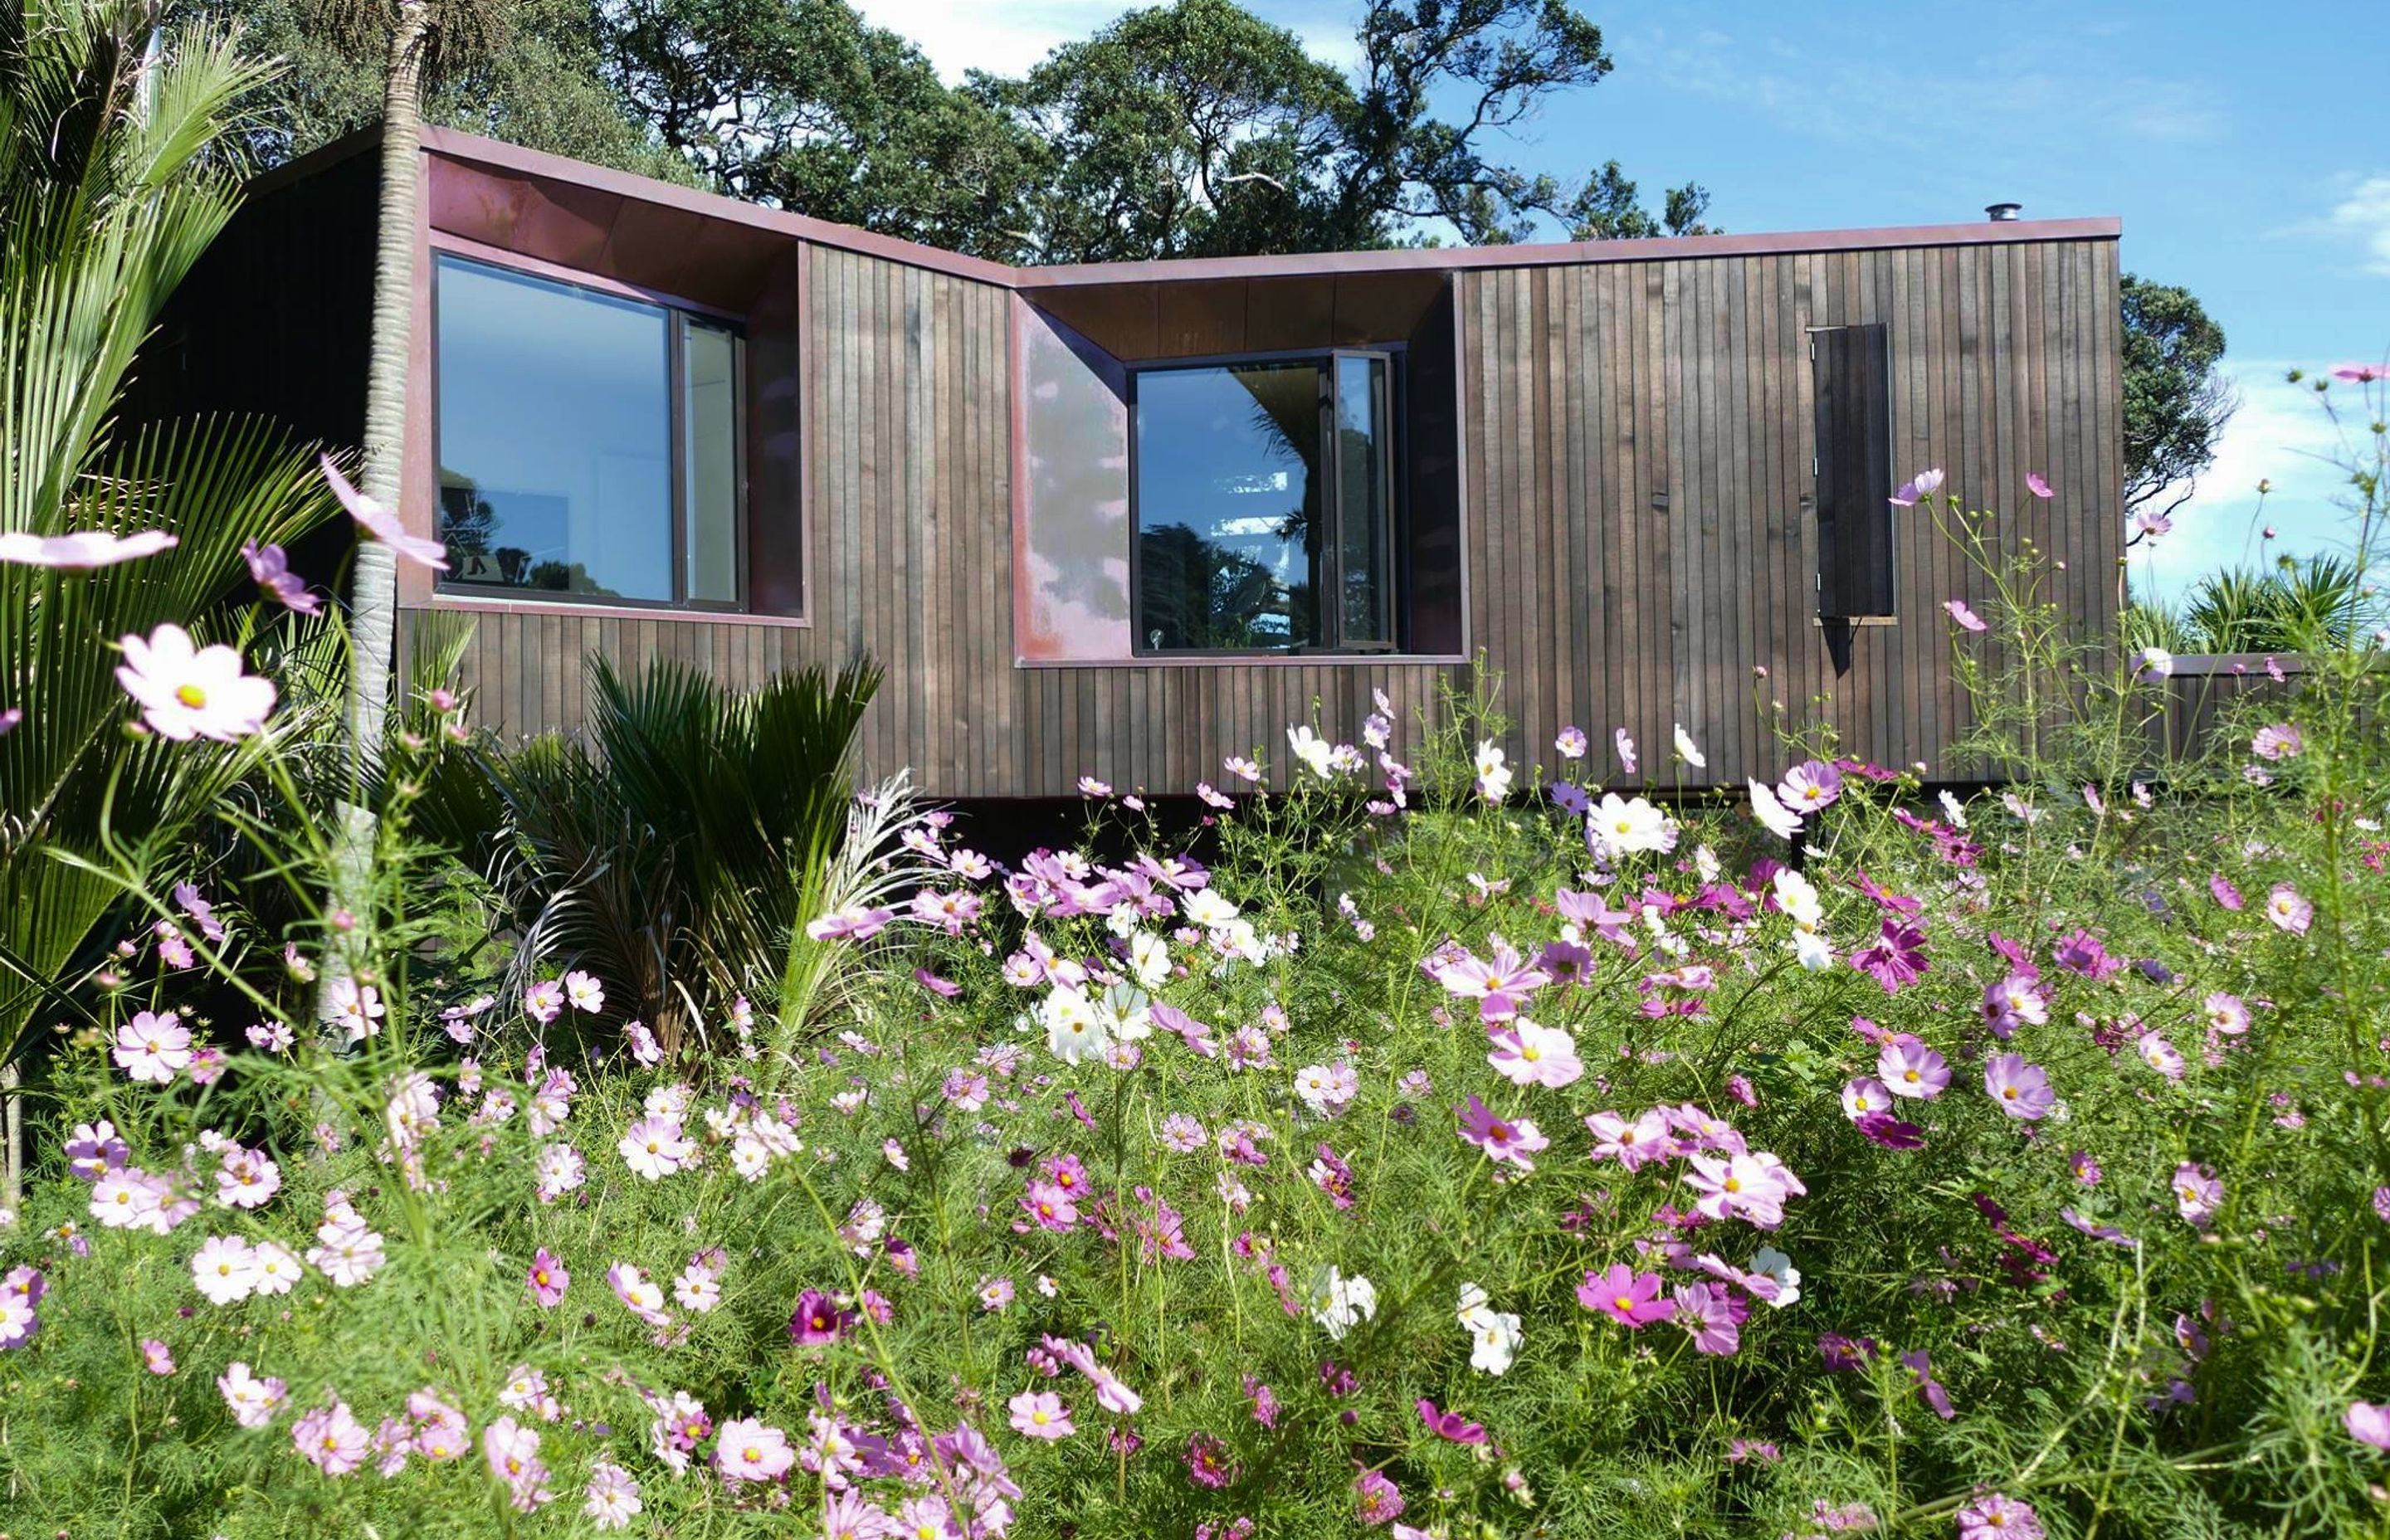 Flowers were planted in this Muriwai garden to encourage abundant insect life, and add a pop of colour.